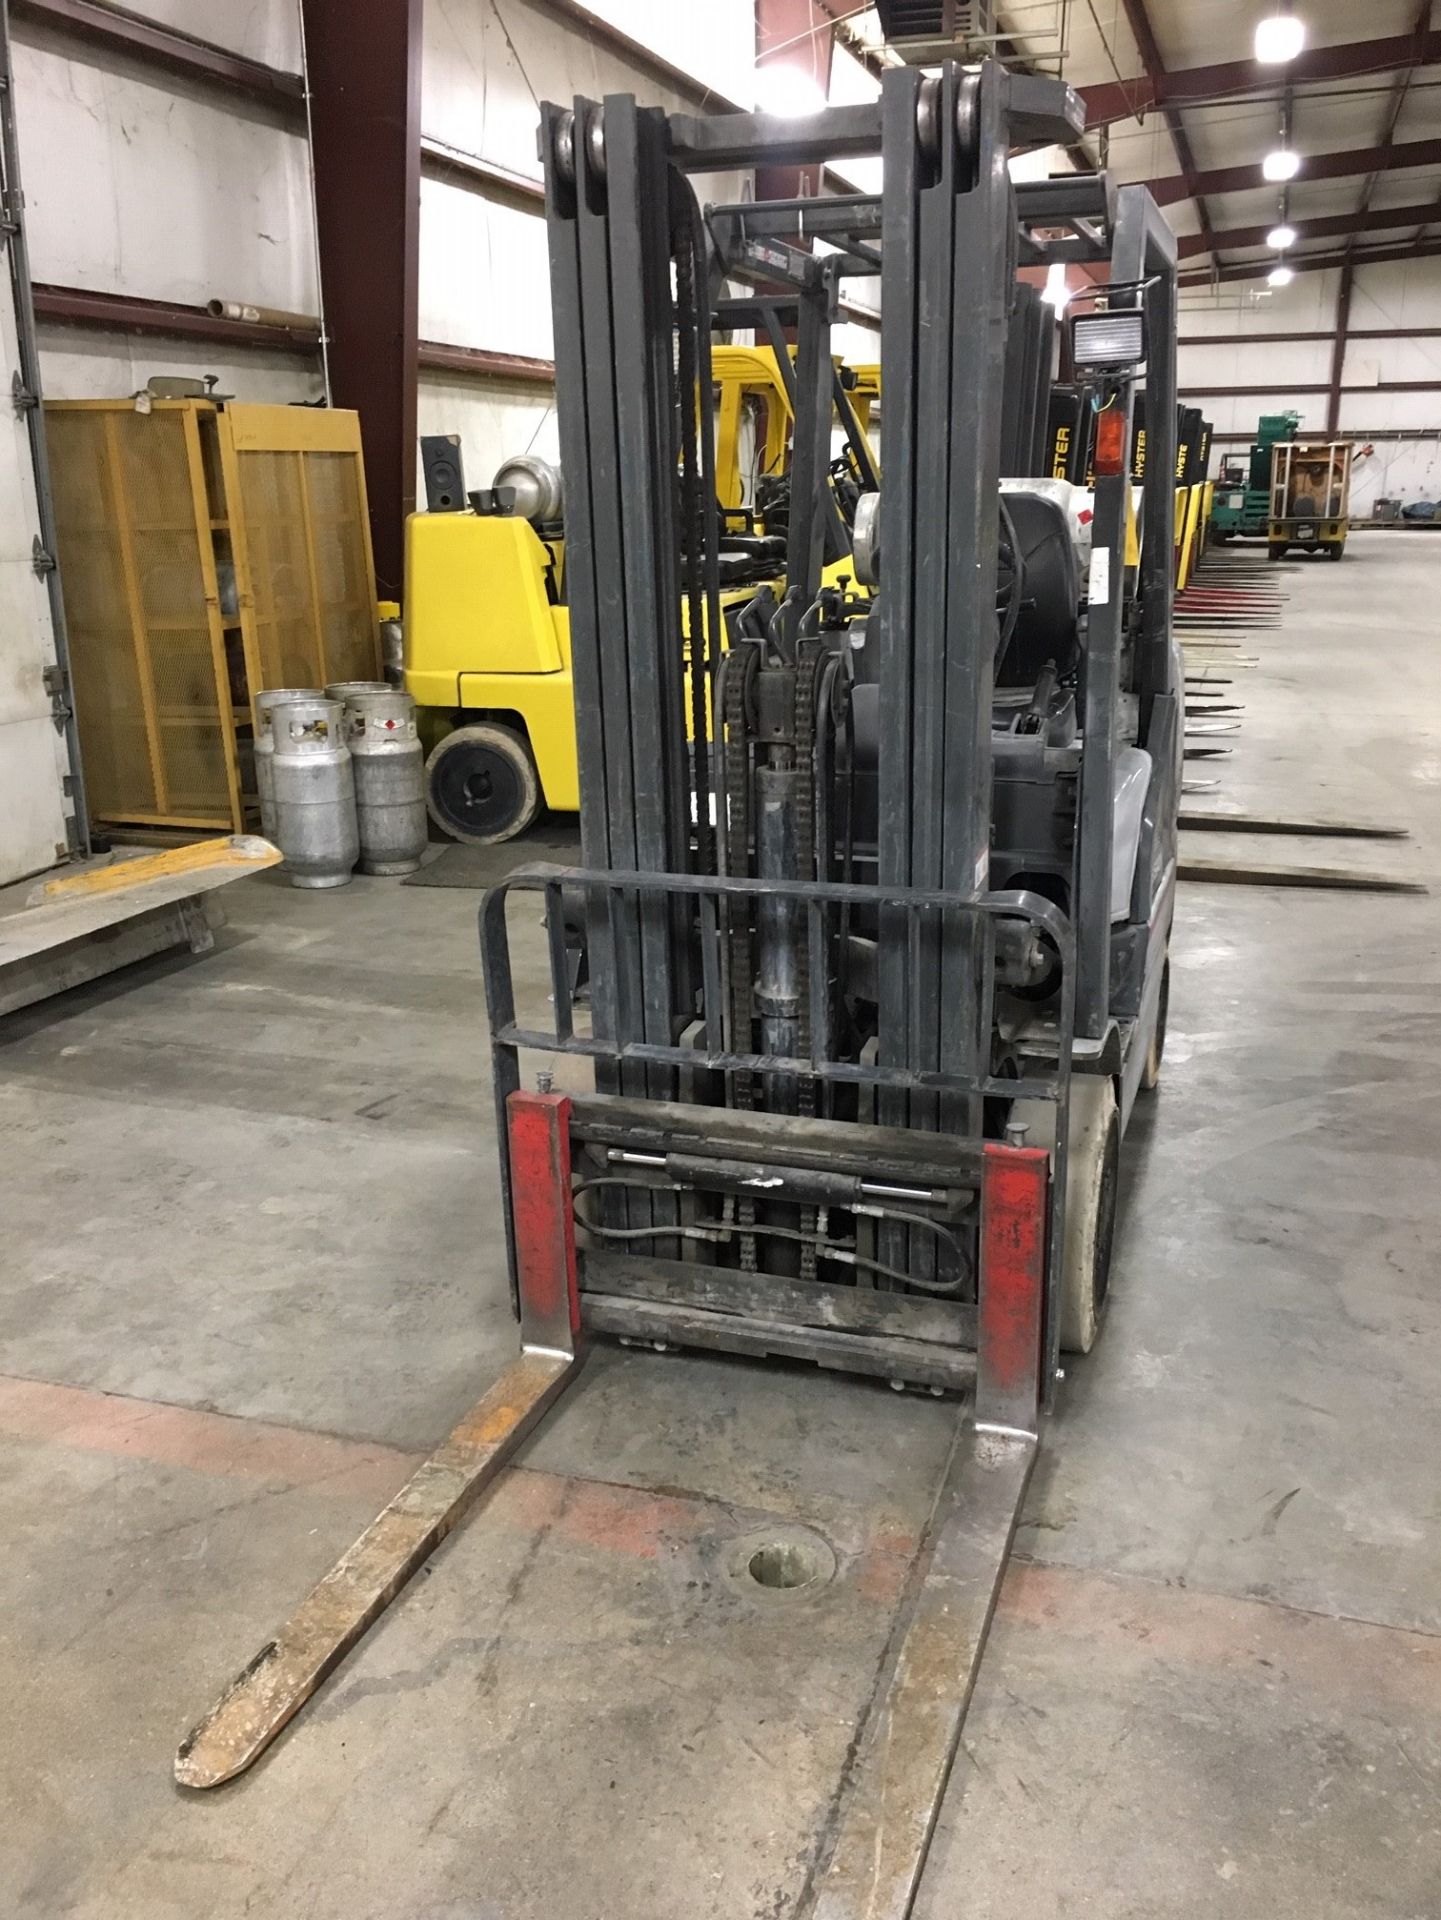 ***LOCATED IN HAMILTON, OHIO** 2007 NISSAN 5,000-LB. FORKLIFT, MOD: MCPL02A25LV, 3-STAGE, SIDESHIFT - Image 2 of 5